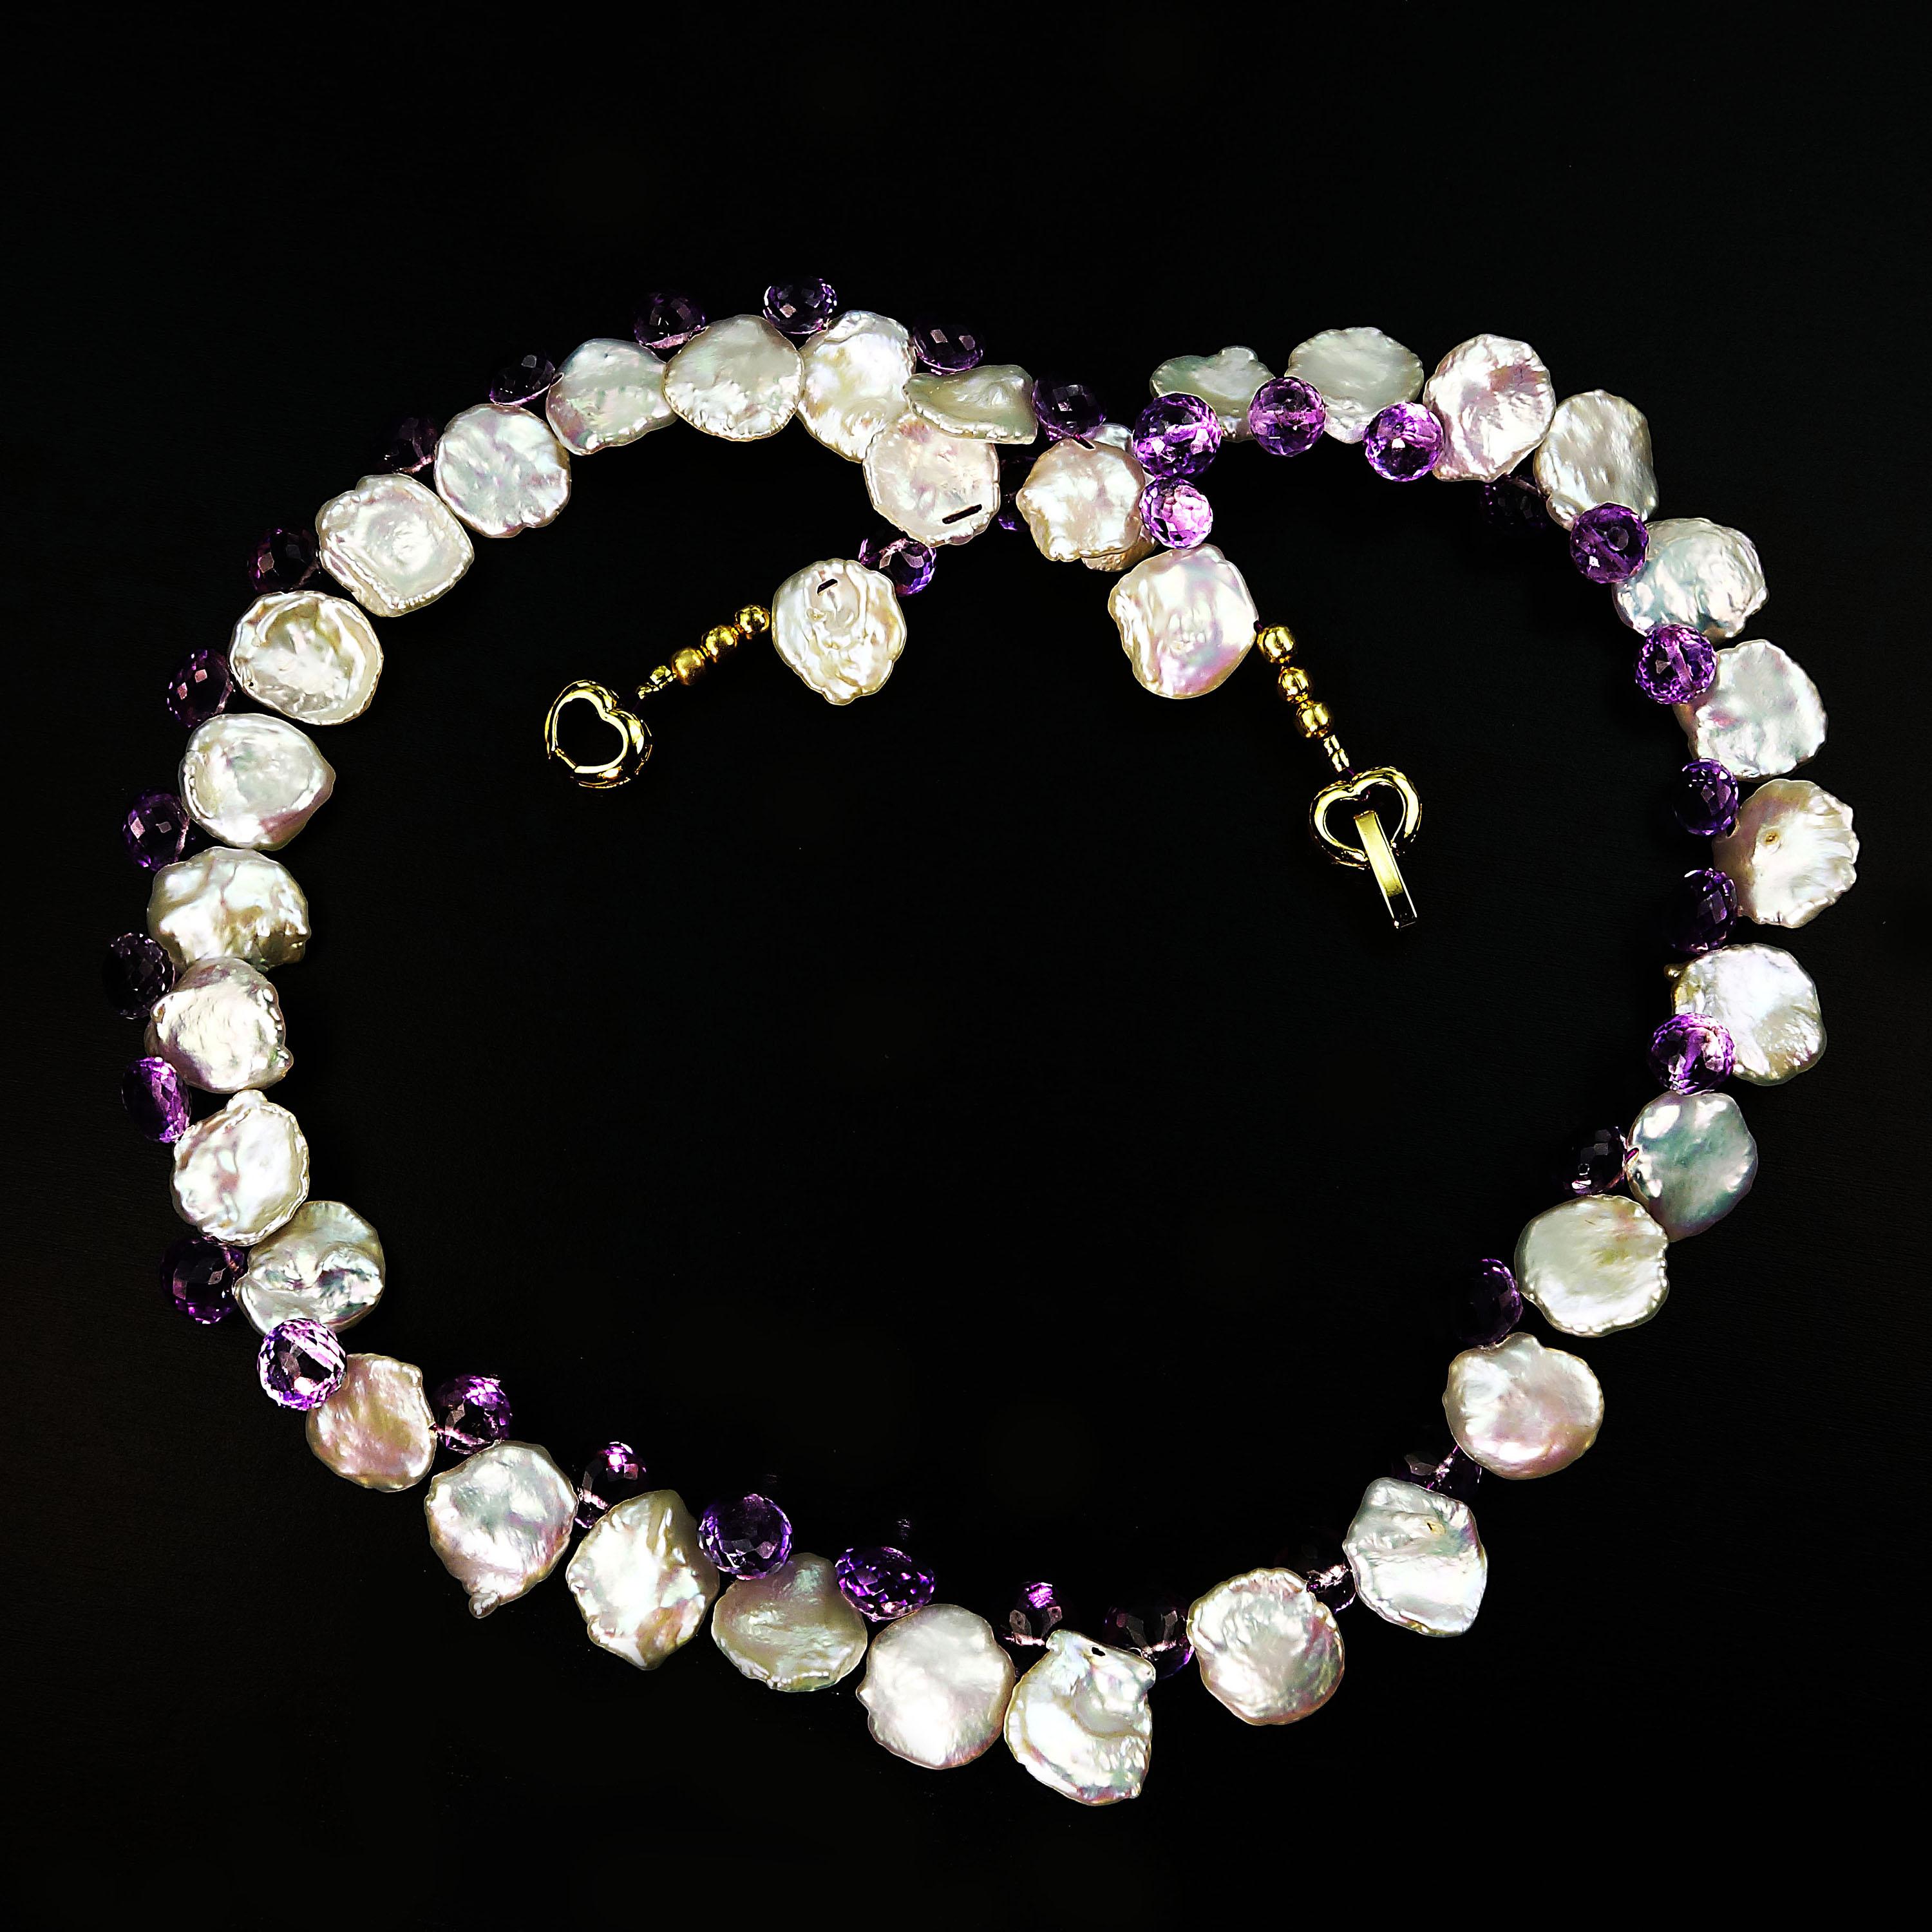 Gemjunky Iridescent White Keshi Pearl and Amethyst Briolette Necklace  6